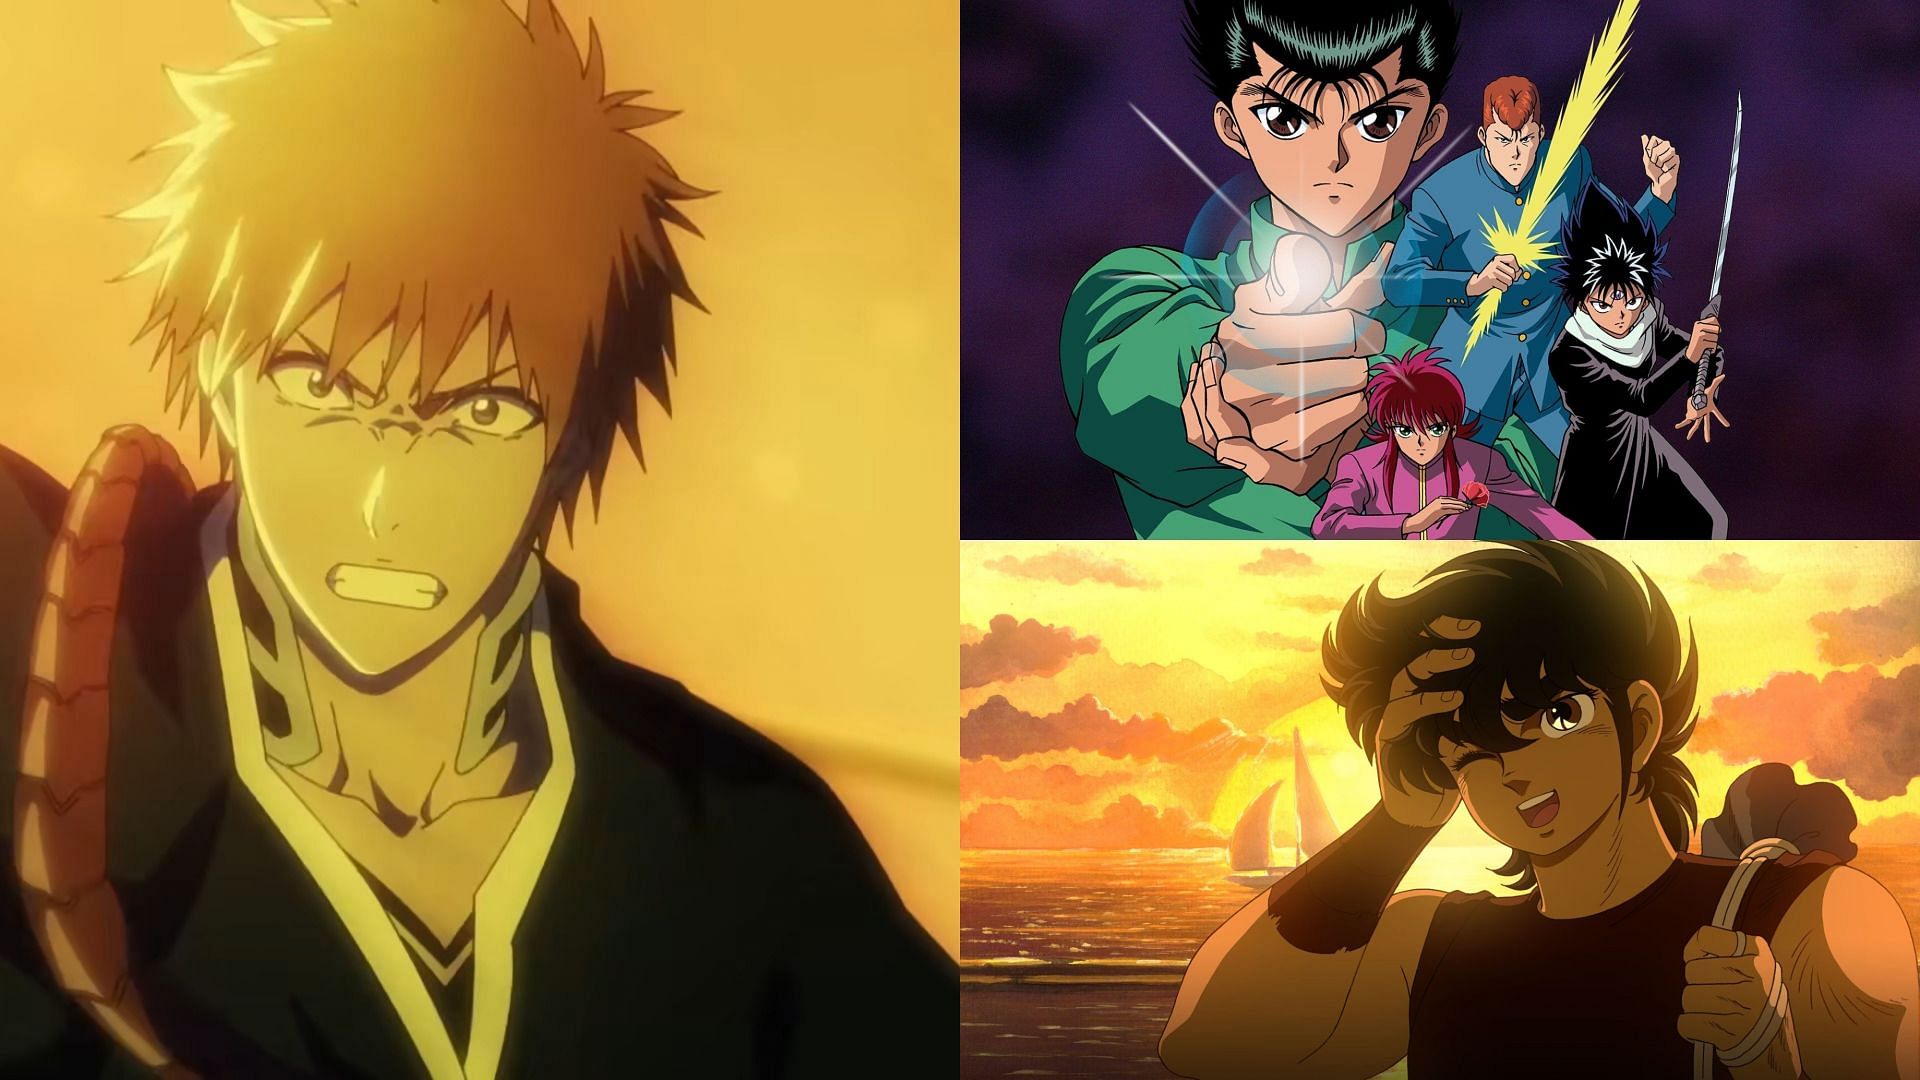 Bleach was inspired by two great series (Image via Studio Pierrot and Toei Animation)